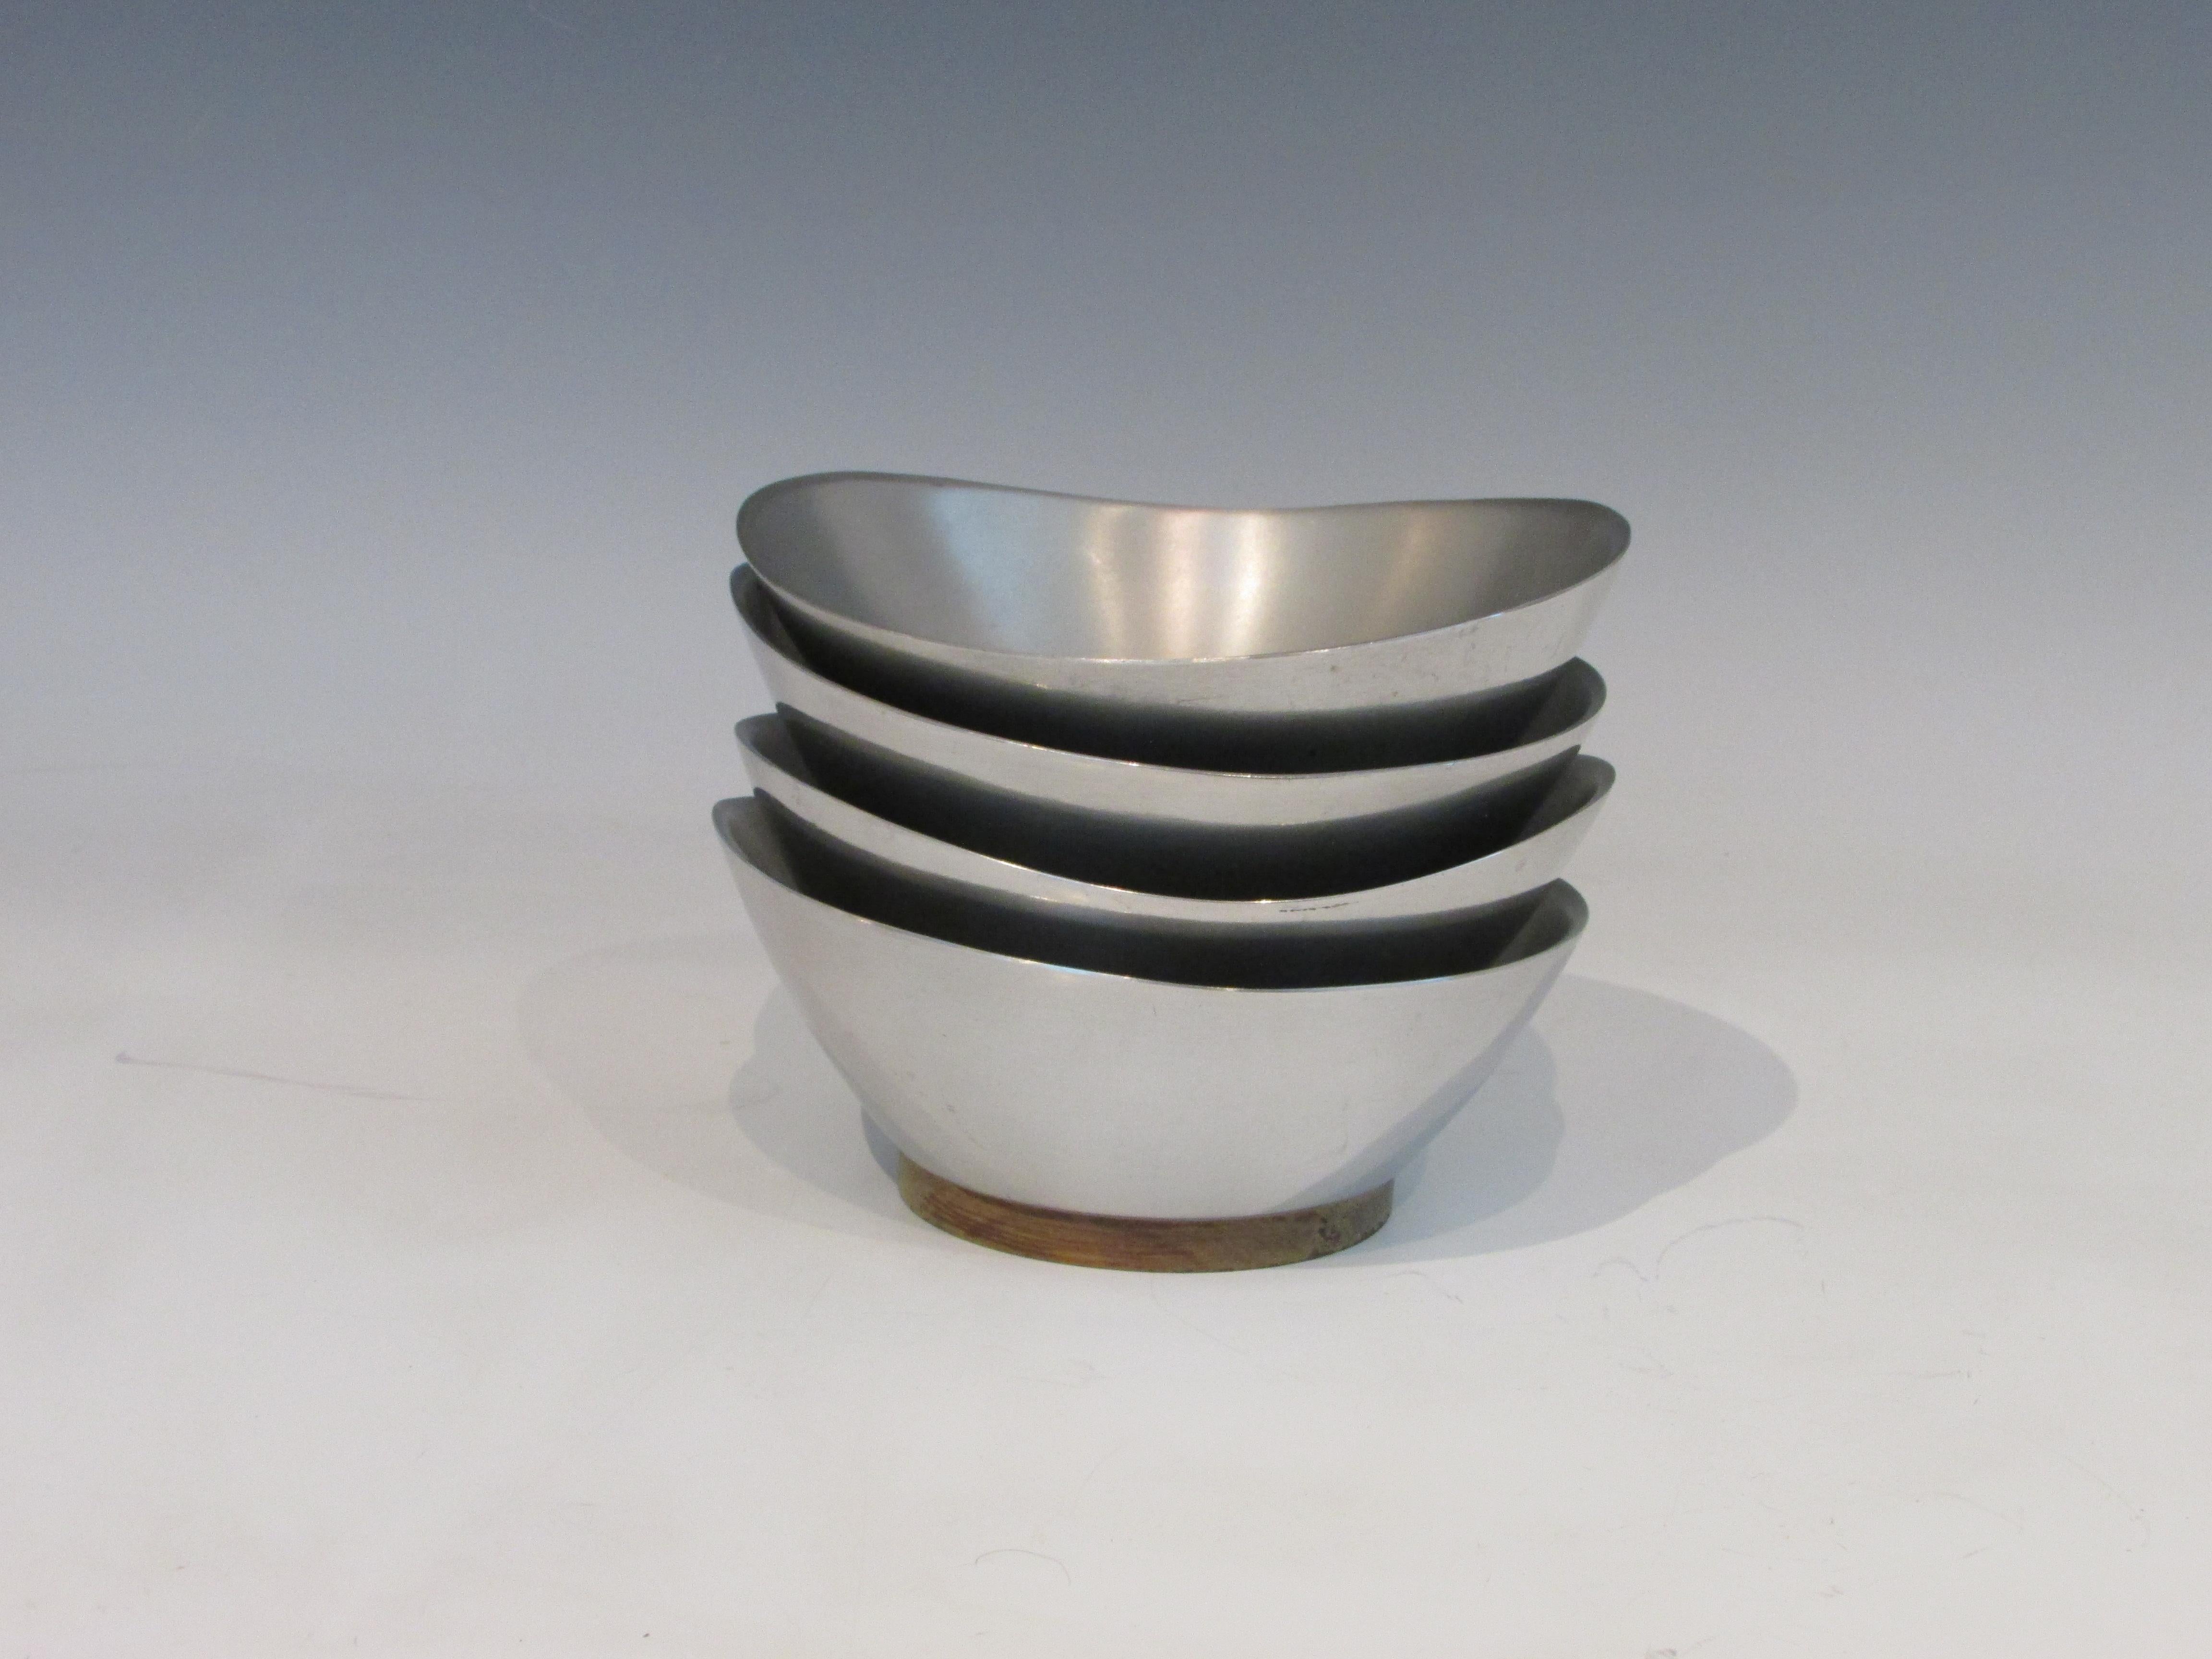 Cast aluminum serving bowls in bio morphic shape with walnut bases. Set of four.